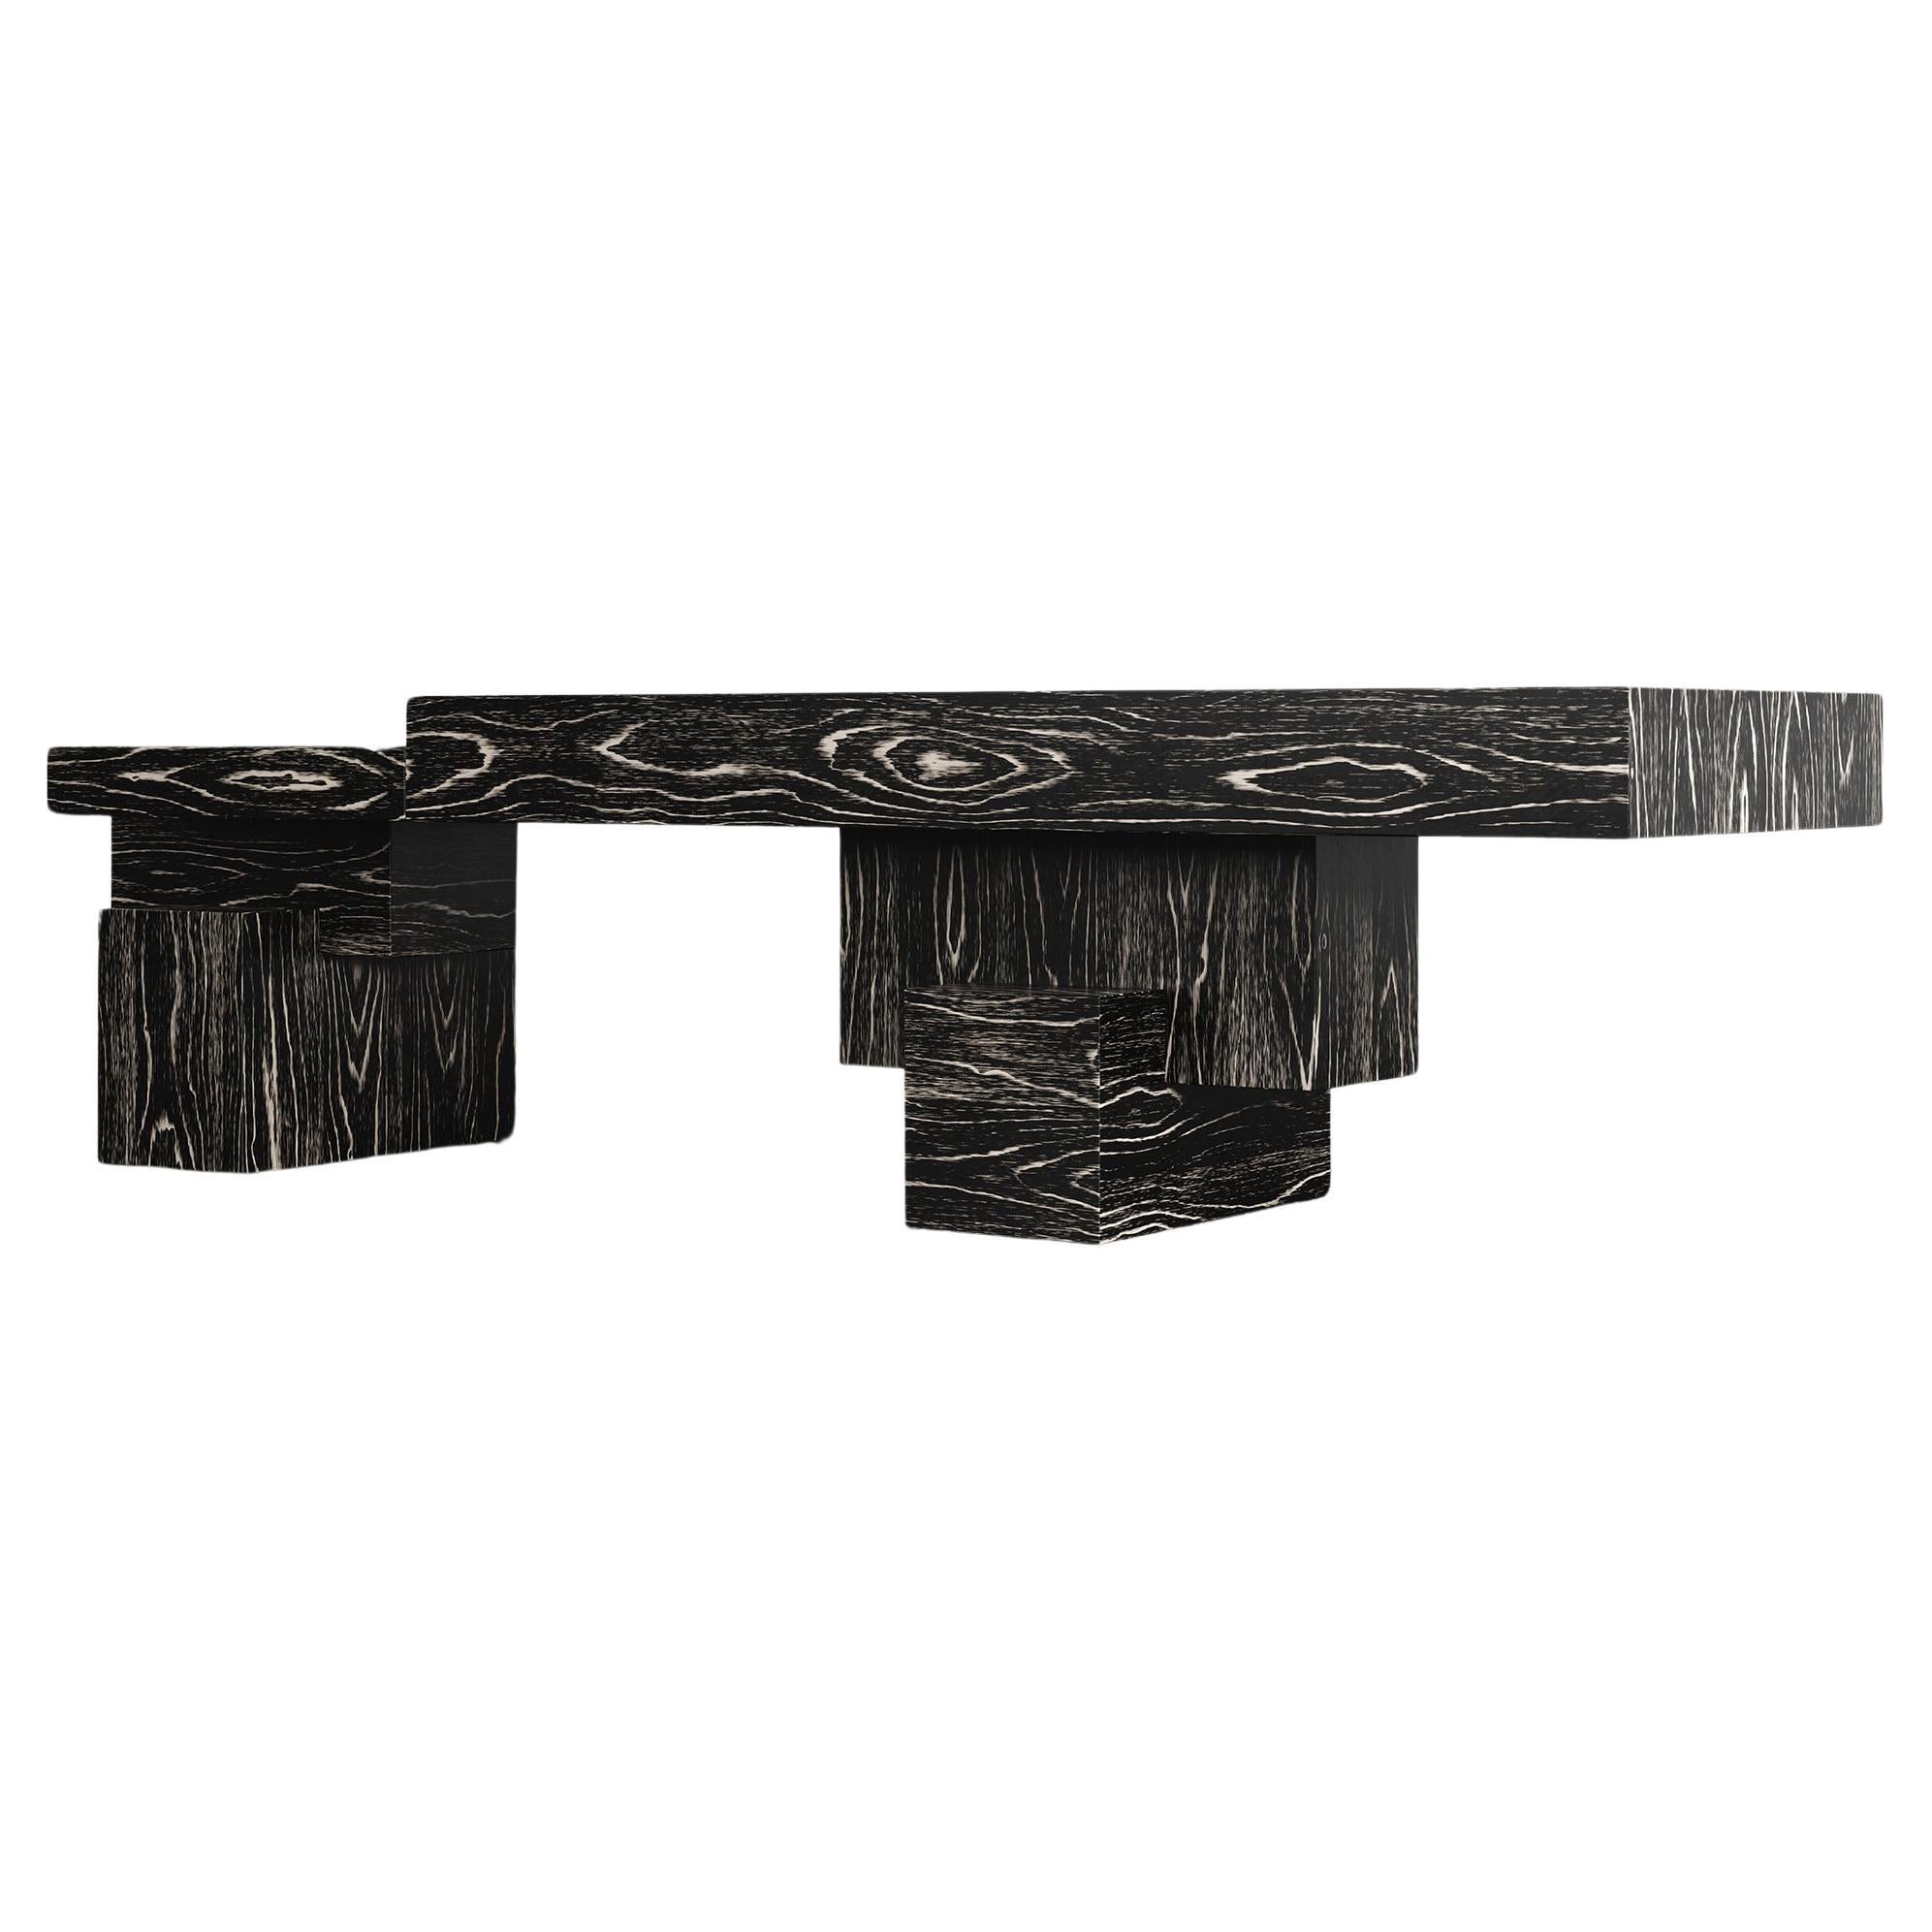 LINK COFFEE TABLE - Modern Design with Macassar black/white groove